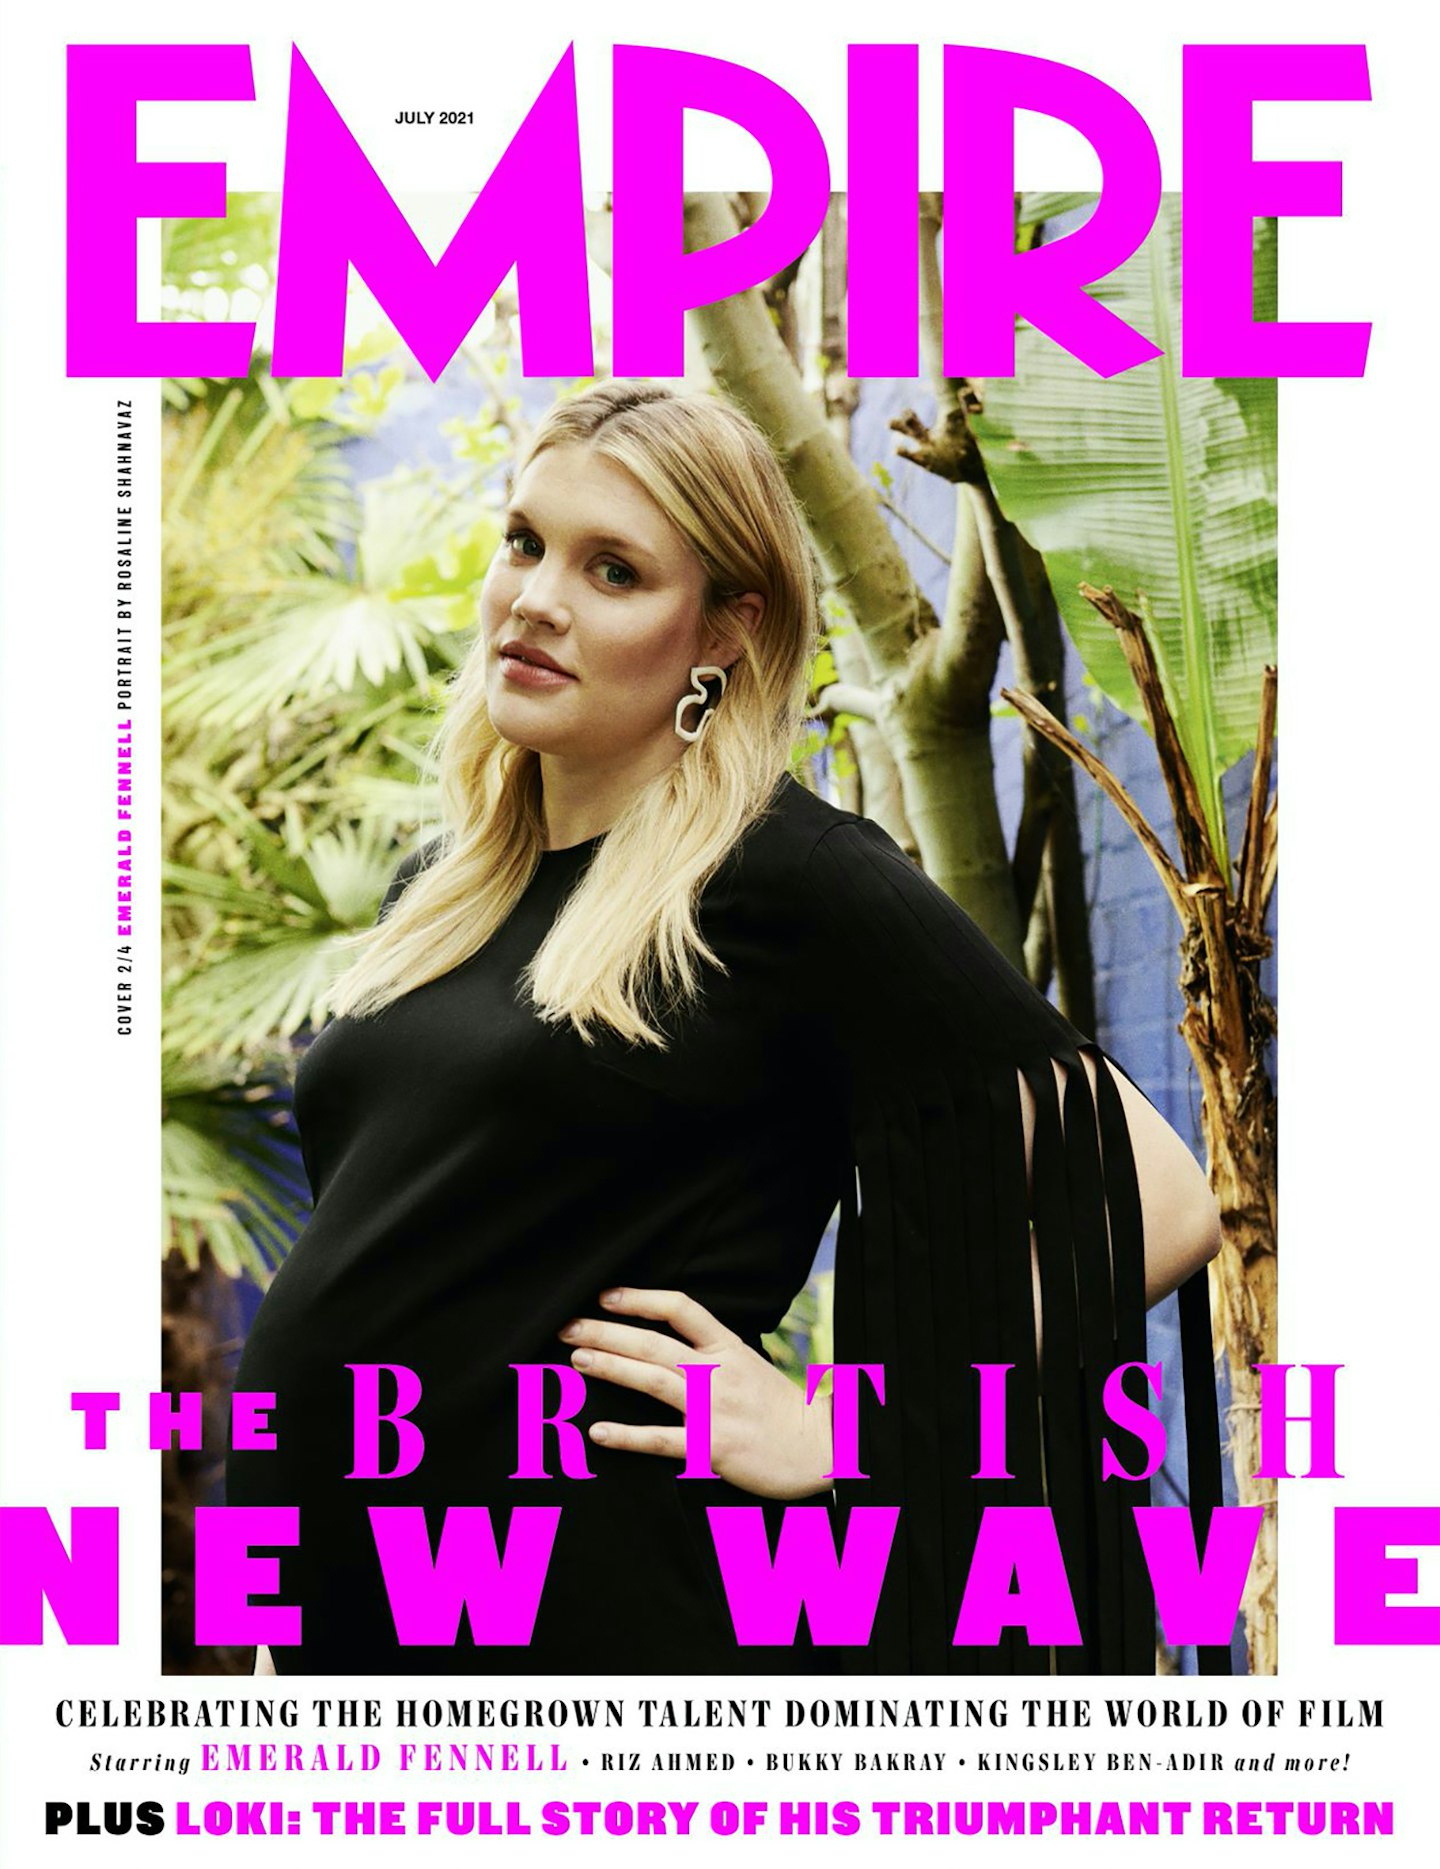 Empire – July 2021 cover – Emerald Fennell